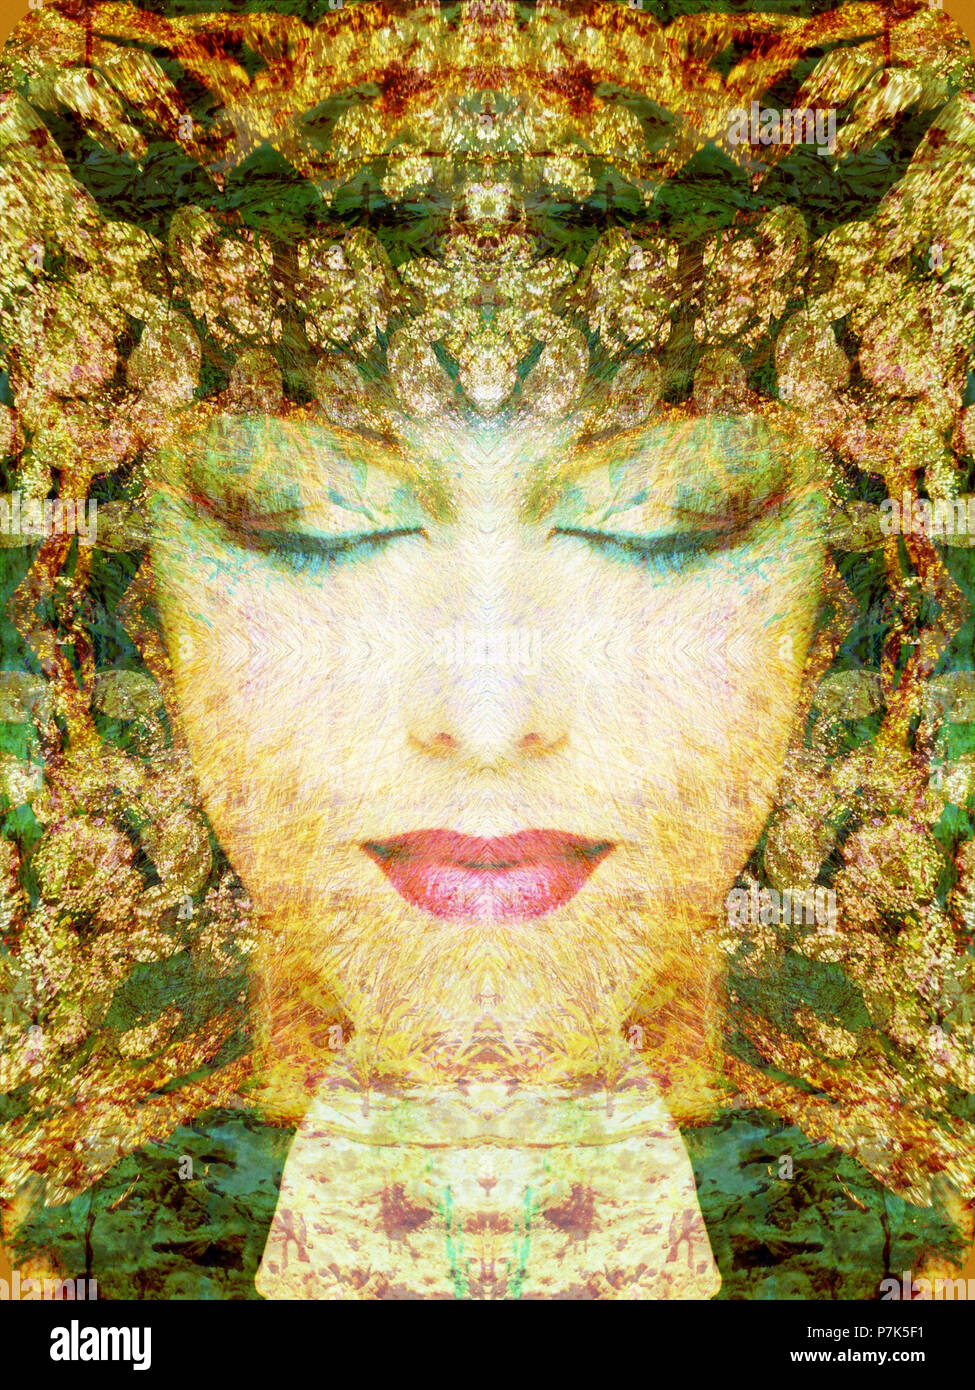 Portrait of a woman overlaid with textures and ornaments, Stock Photo